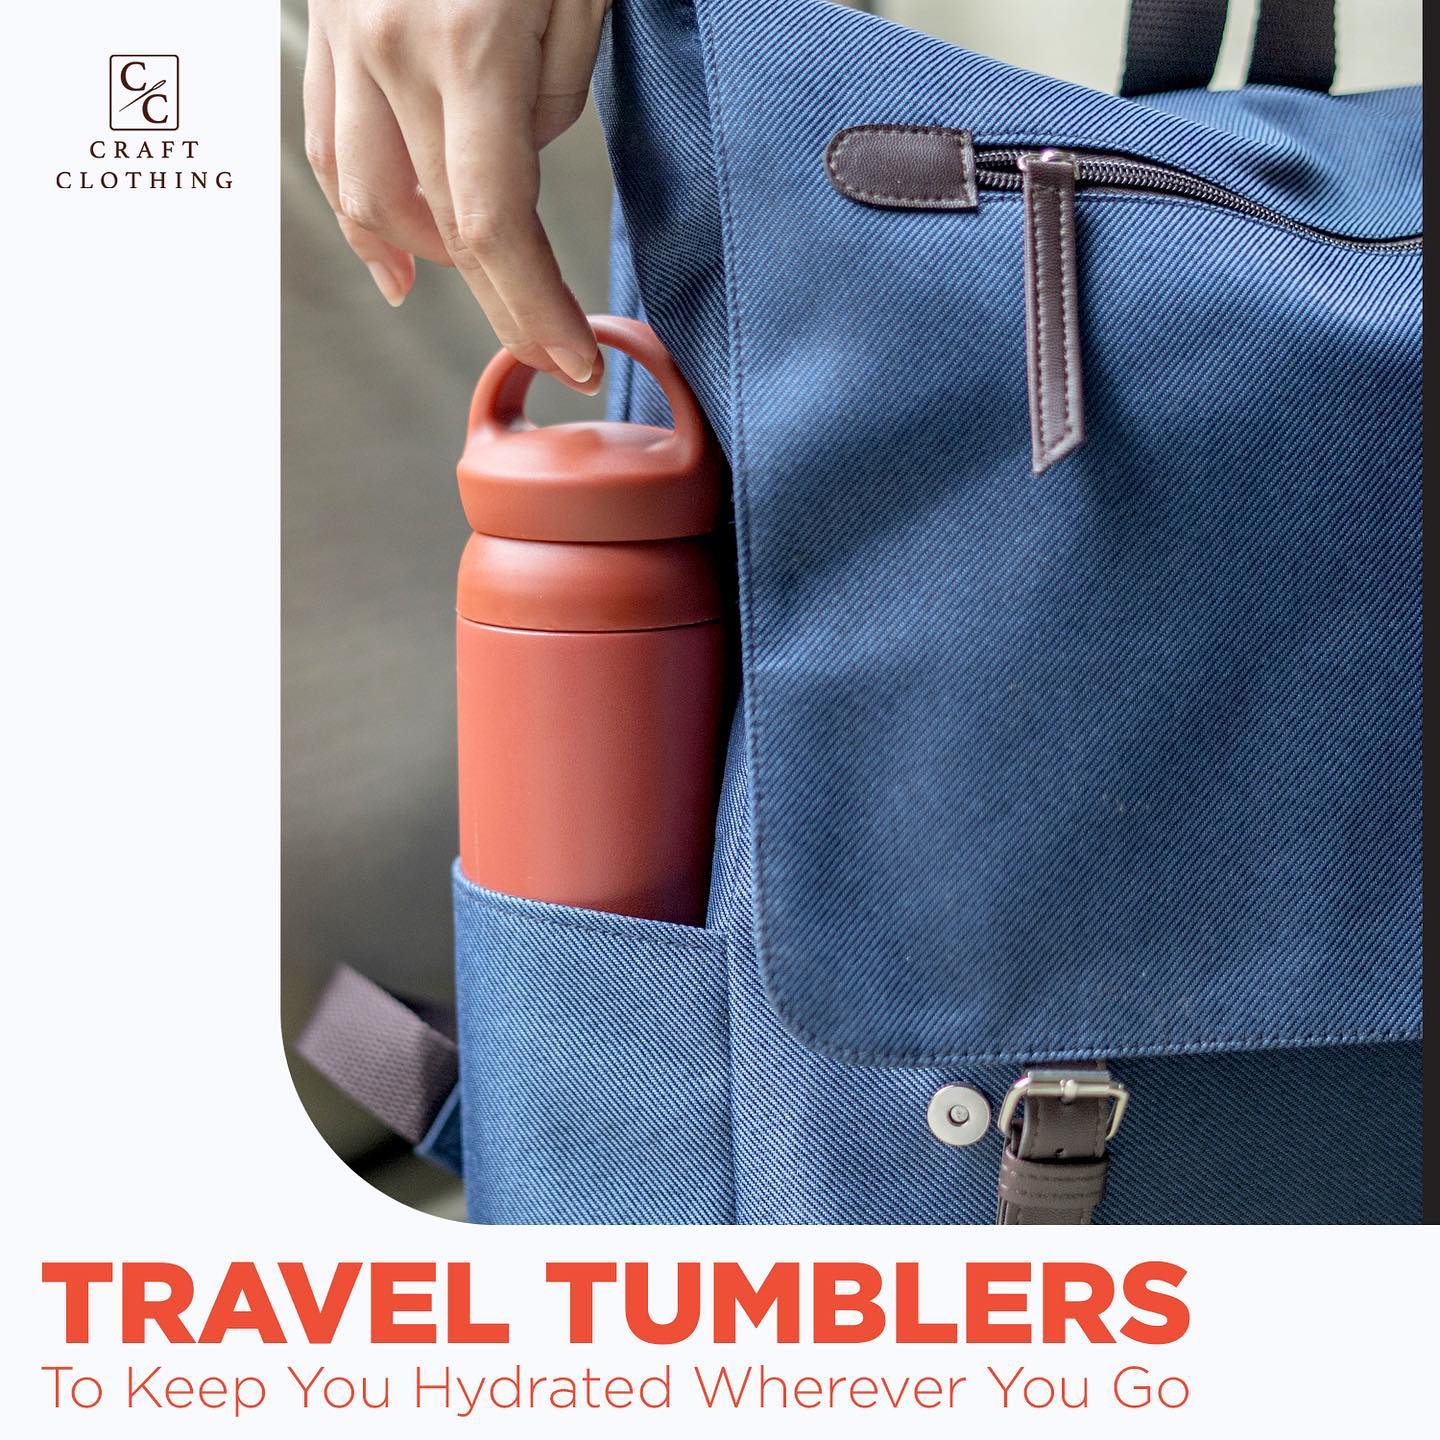 Travel Tumblers to Keep You Hydrated Wherever You Go